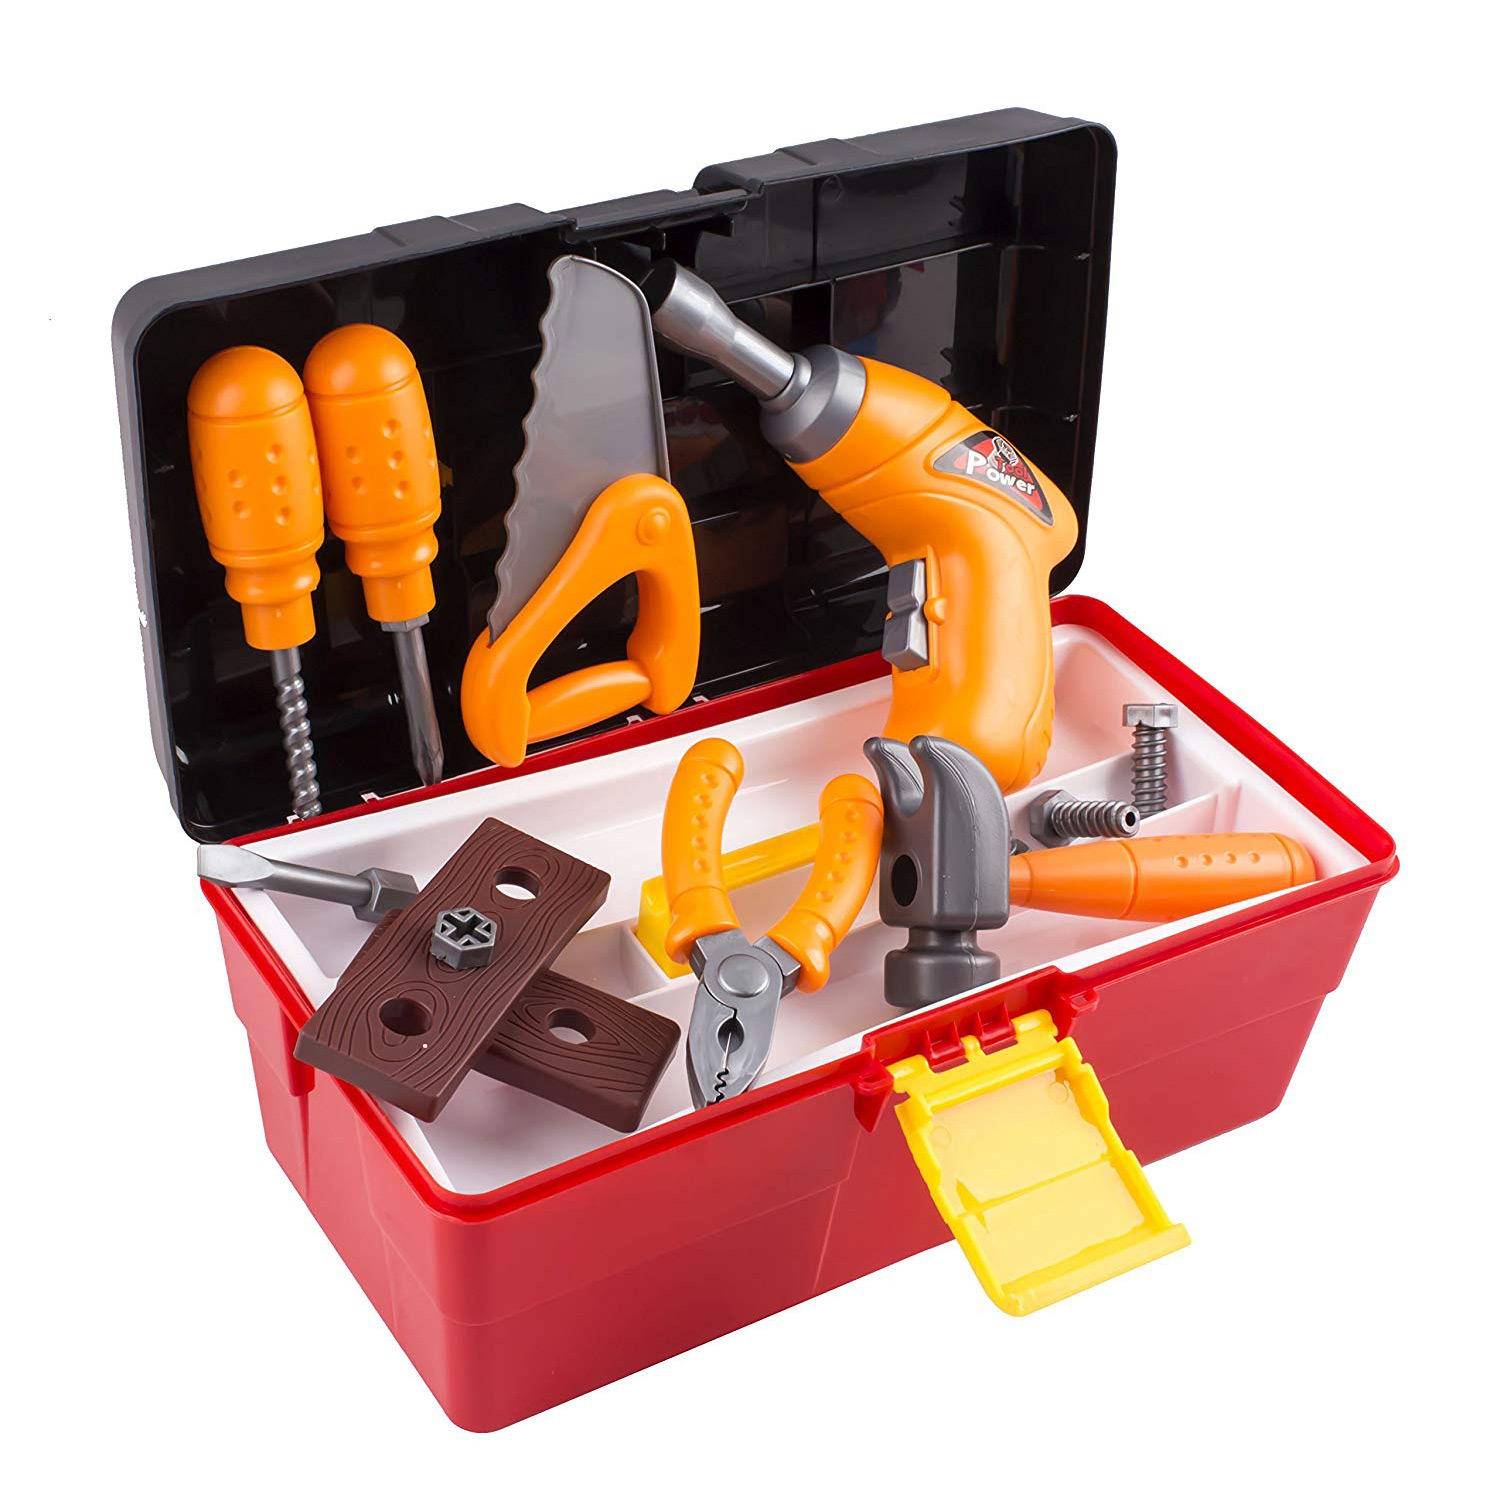 14x Plastic hammer/screwdriver/wrench repair tools toy set For Kids Children 